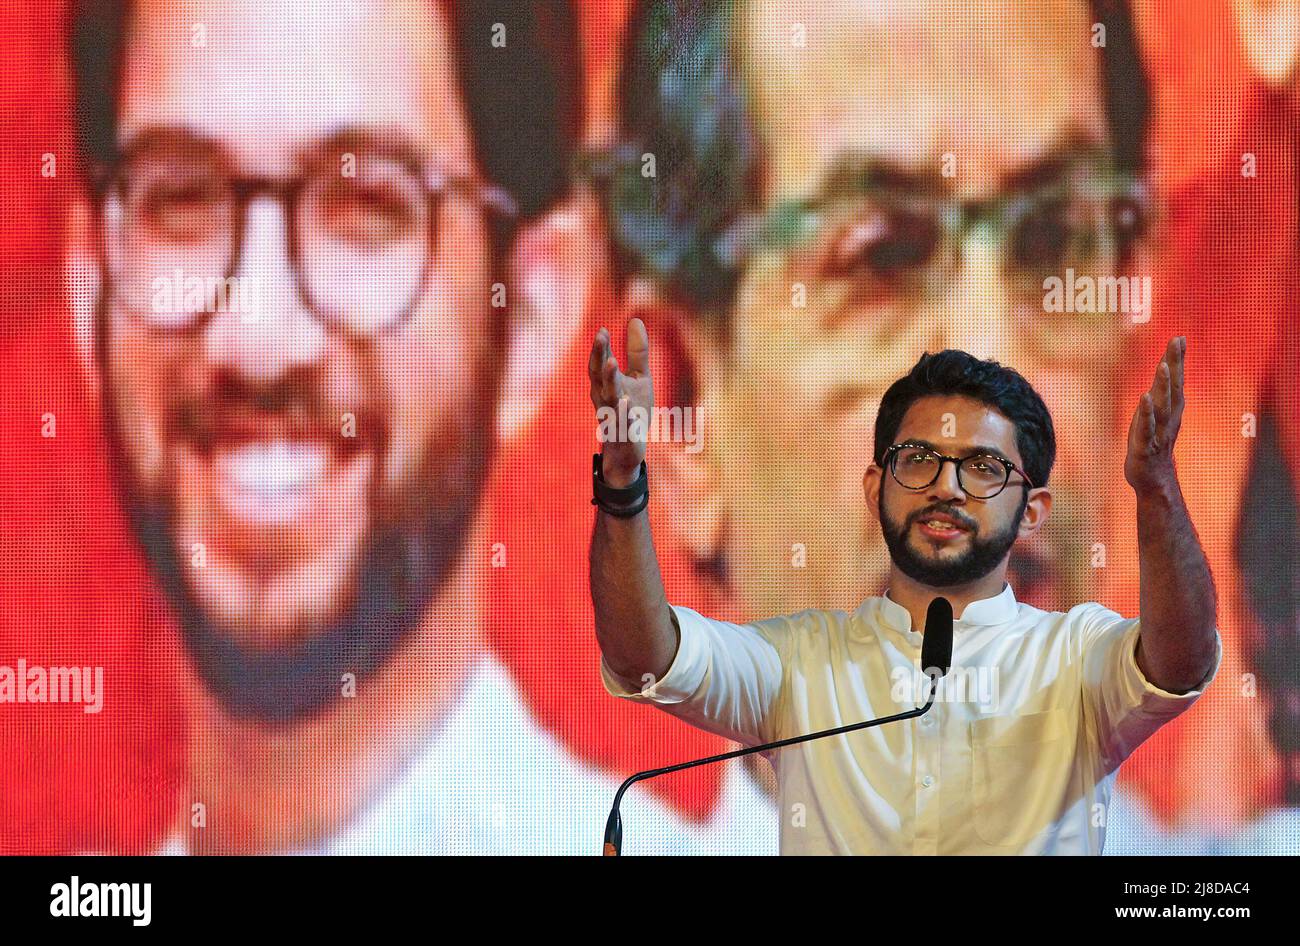 Cabinet Minister of Tourism and Environment (Maharashtra), Aditya Thackeray speaks during the Shiv Sena rally. The rally marked the beginning of the party's second phase of 'Shiv Sampark Abhiyan' party's outreach programme with the voters and karyakartas (workers). (Photo by Ashish Vaishnav / SOPA Images/Sipa USA) Stock Photo